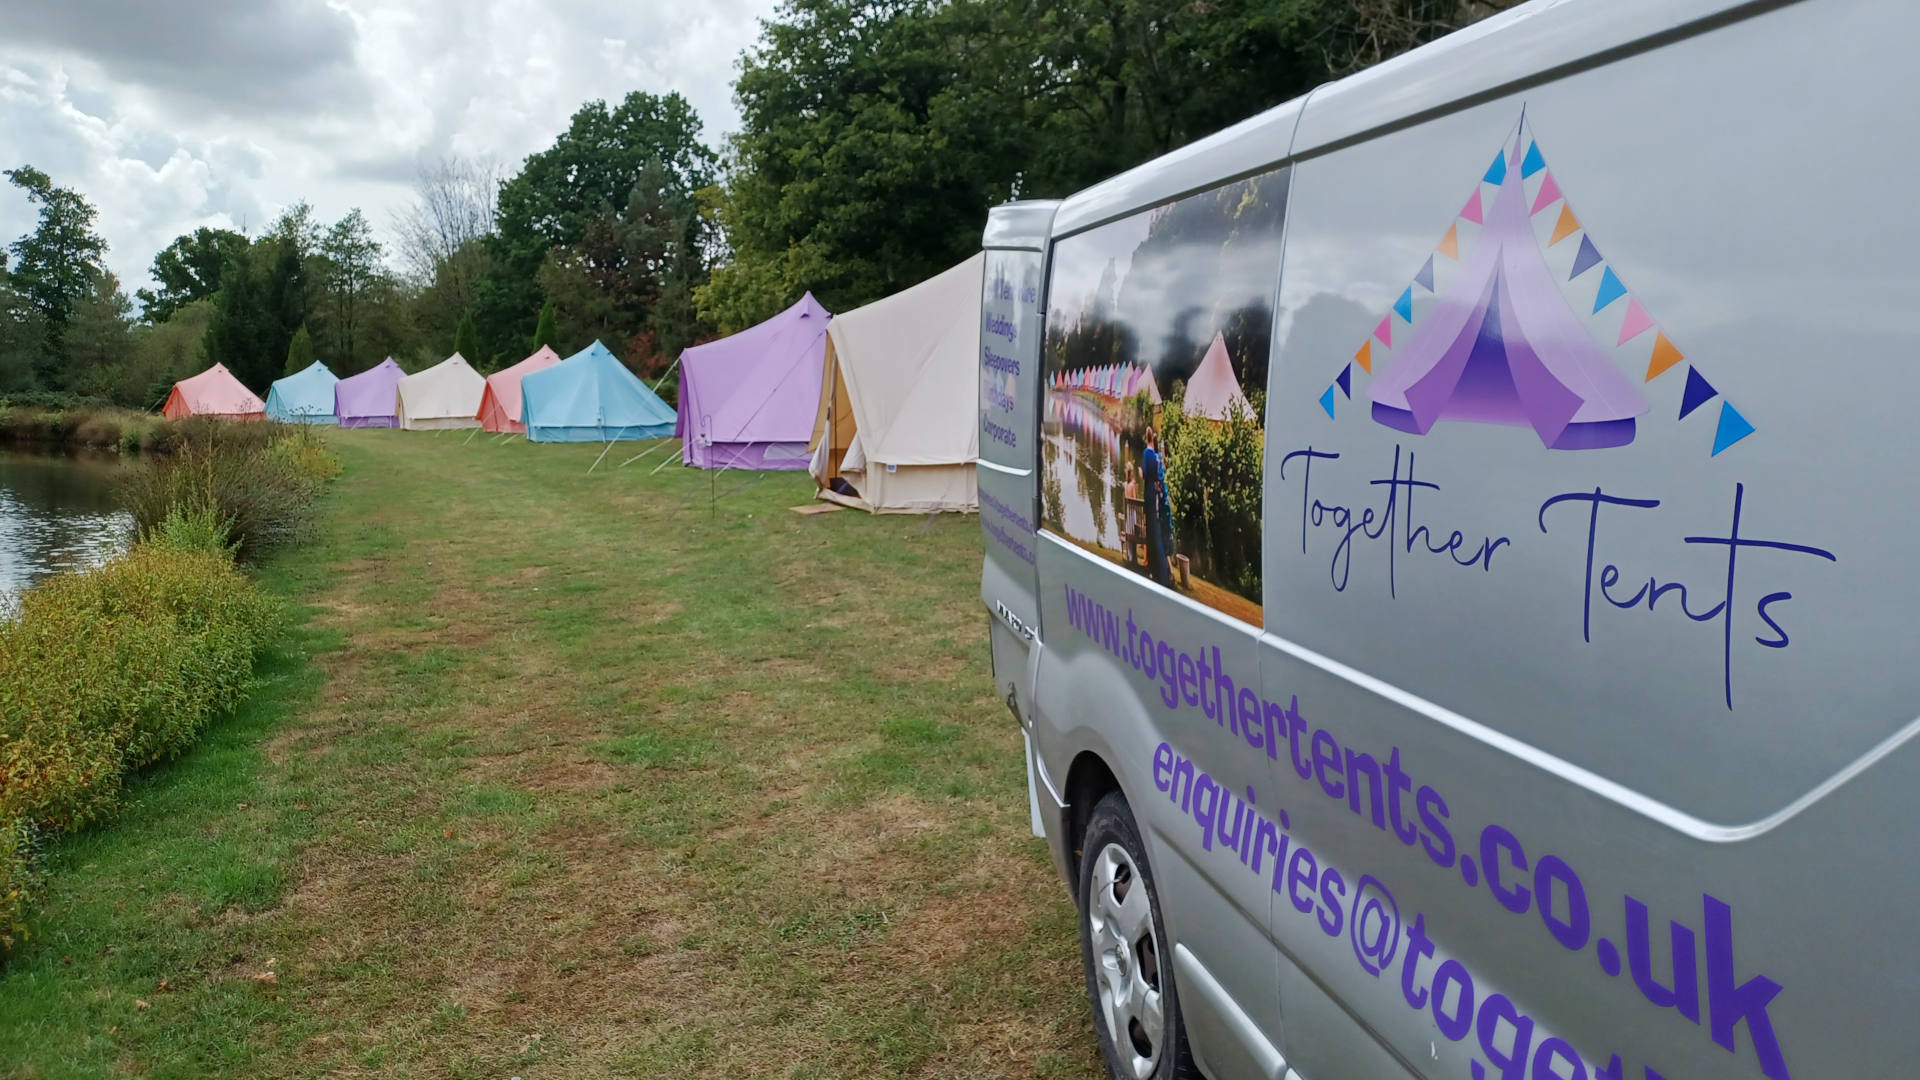 Bell tent hire Hampshire